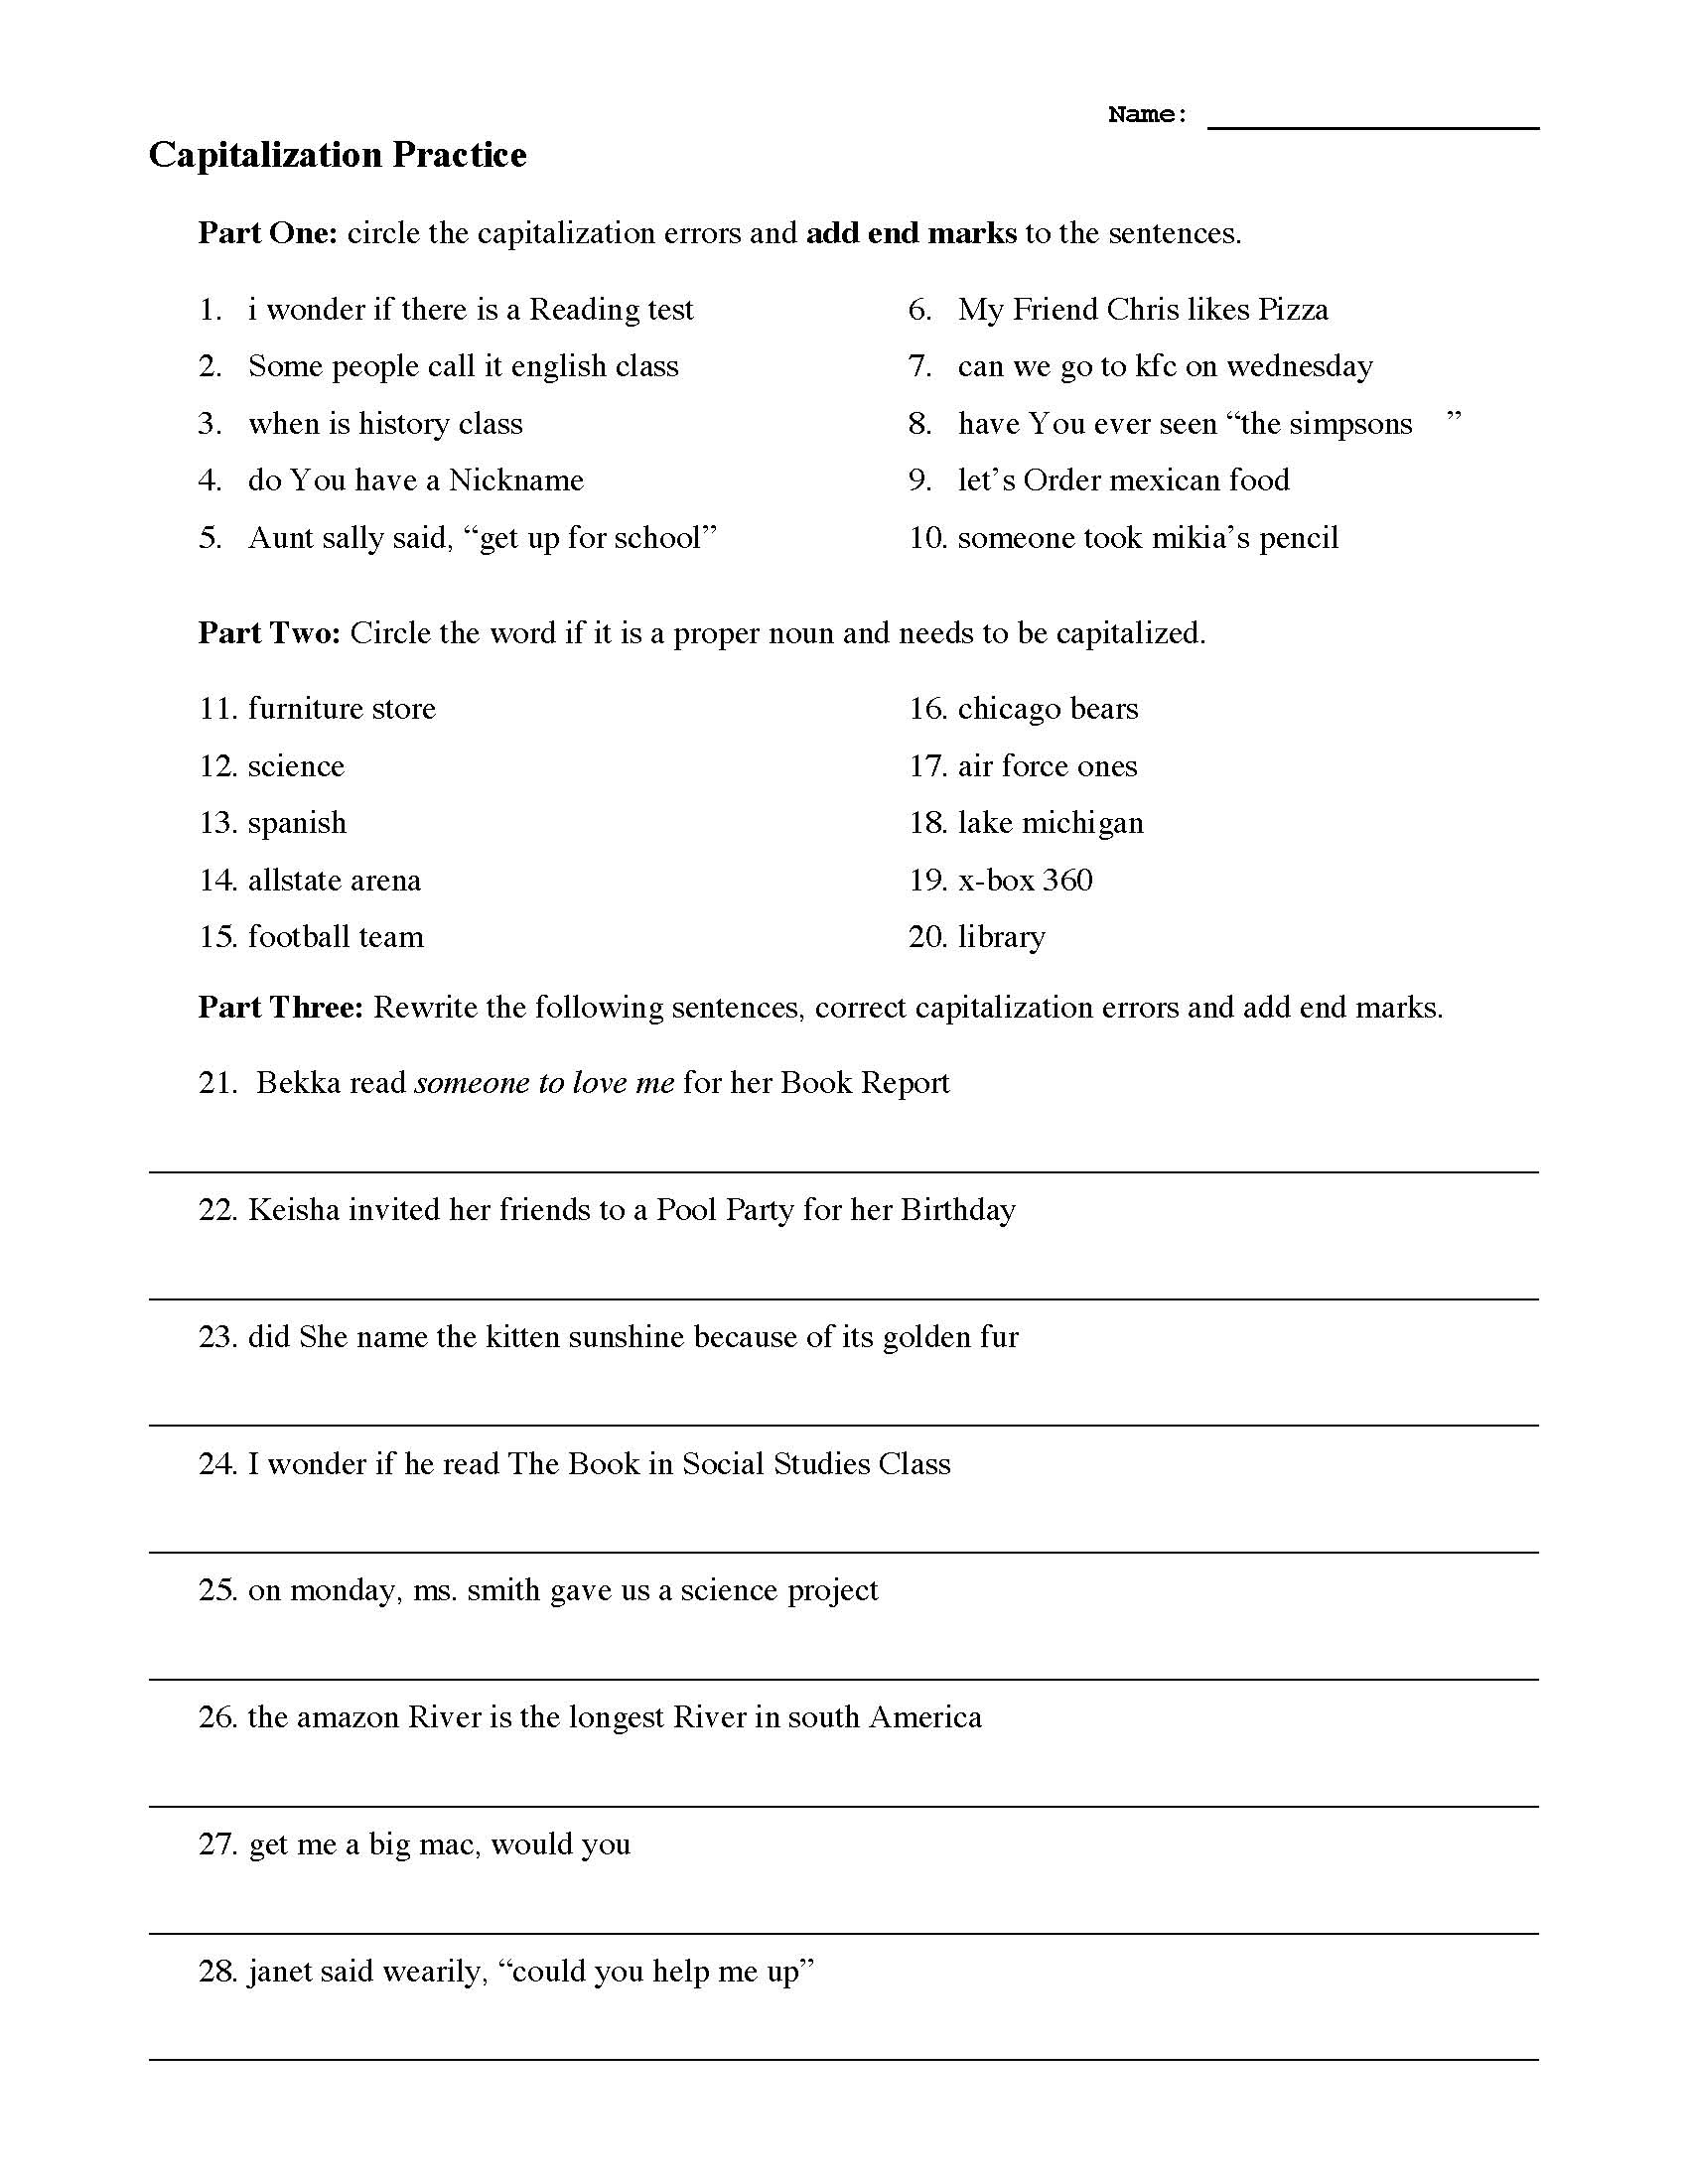 capitalization-practice-worksheet-preview